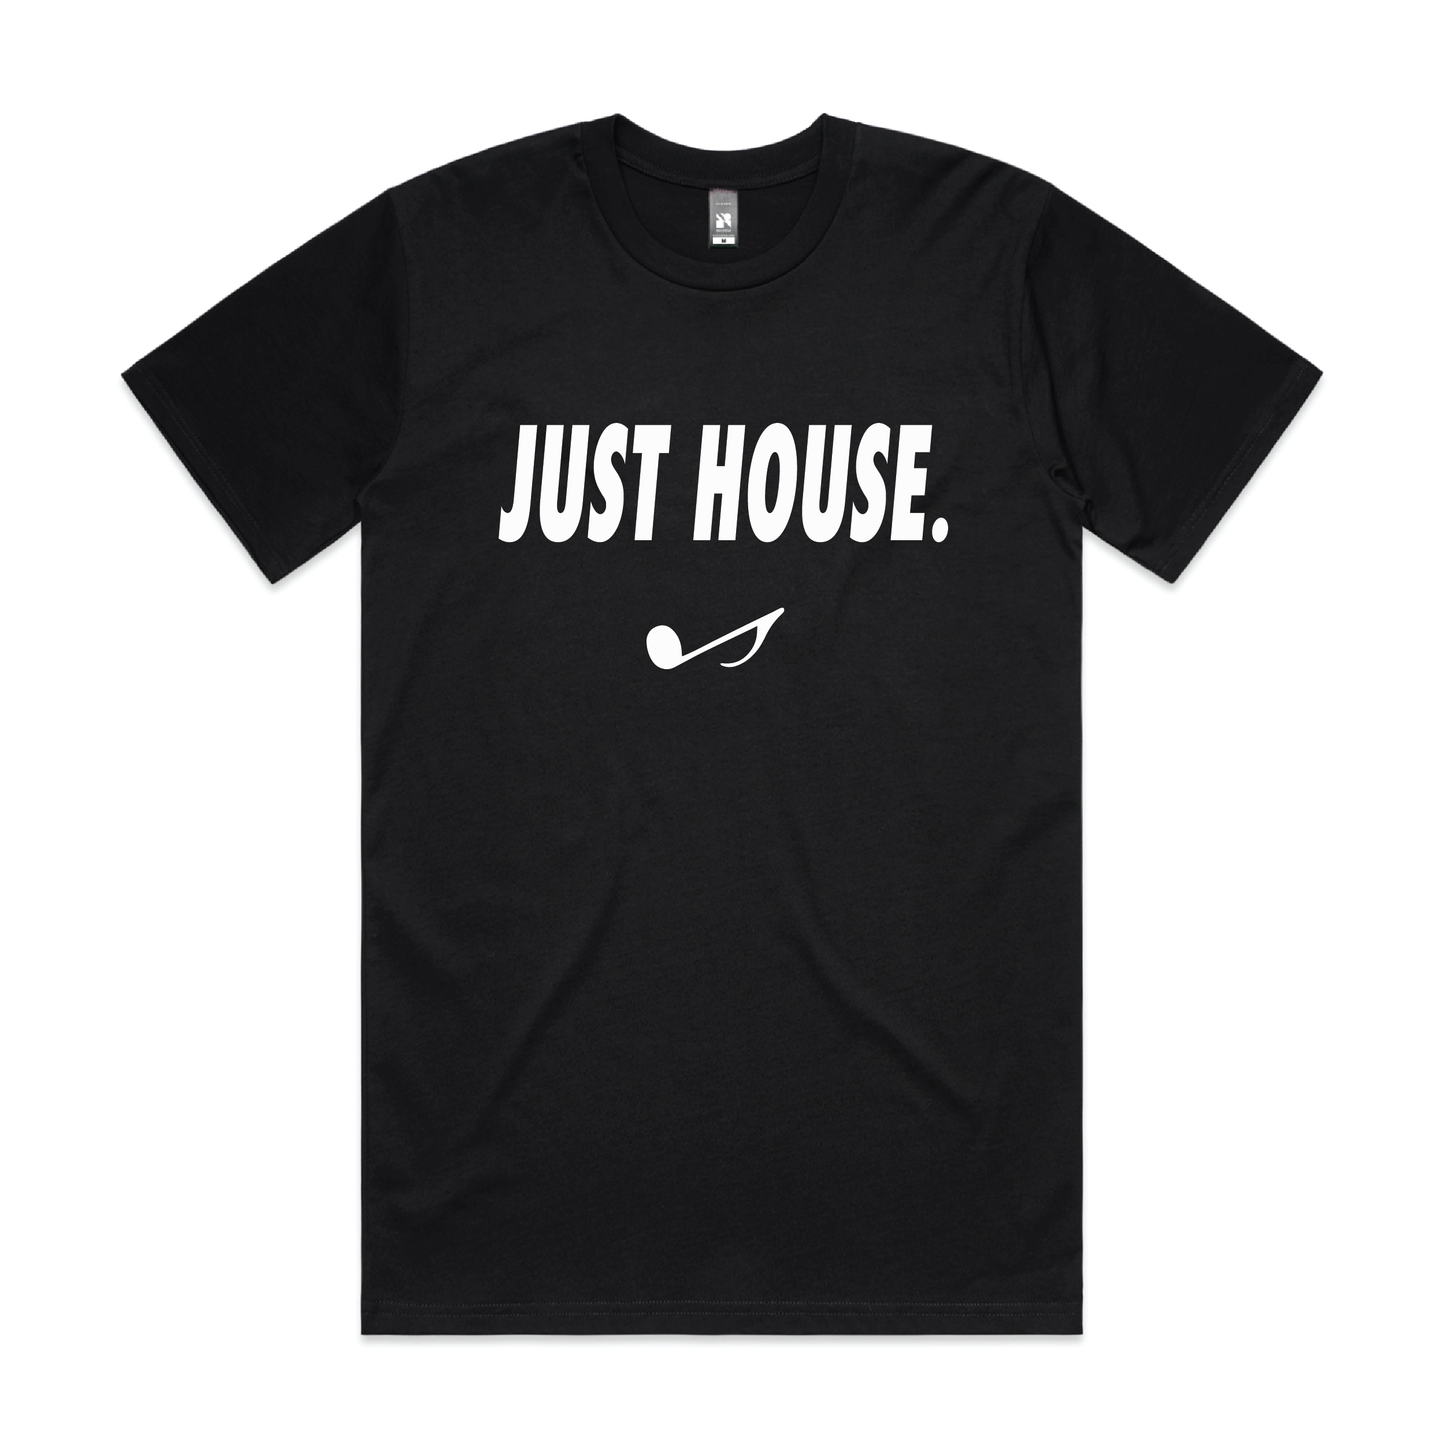 No Requests House Tee - Black